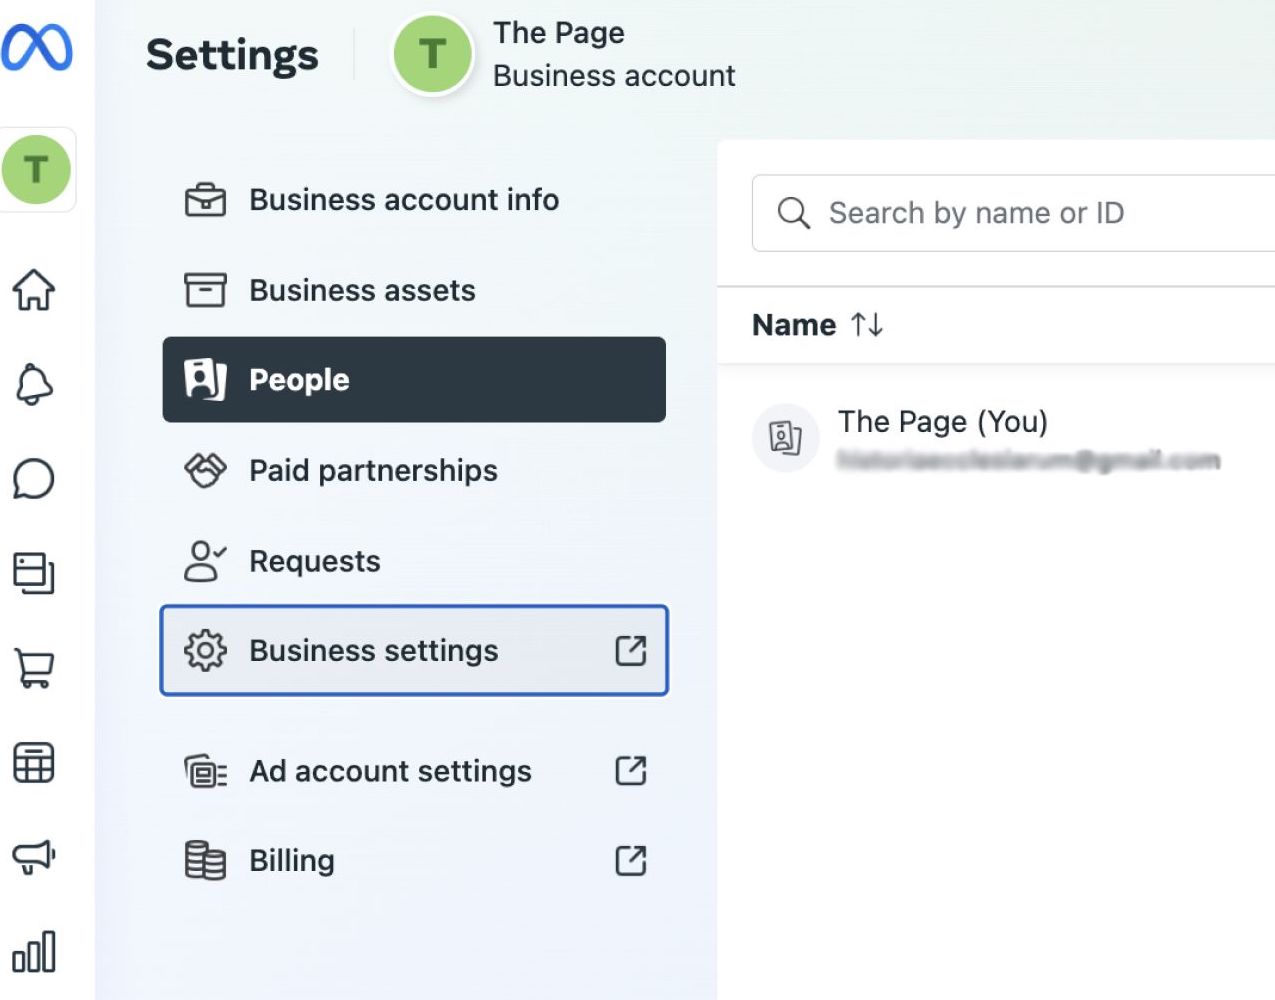 Once you open the Settings page, choose Business settings.